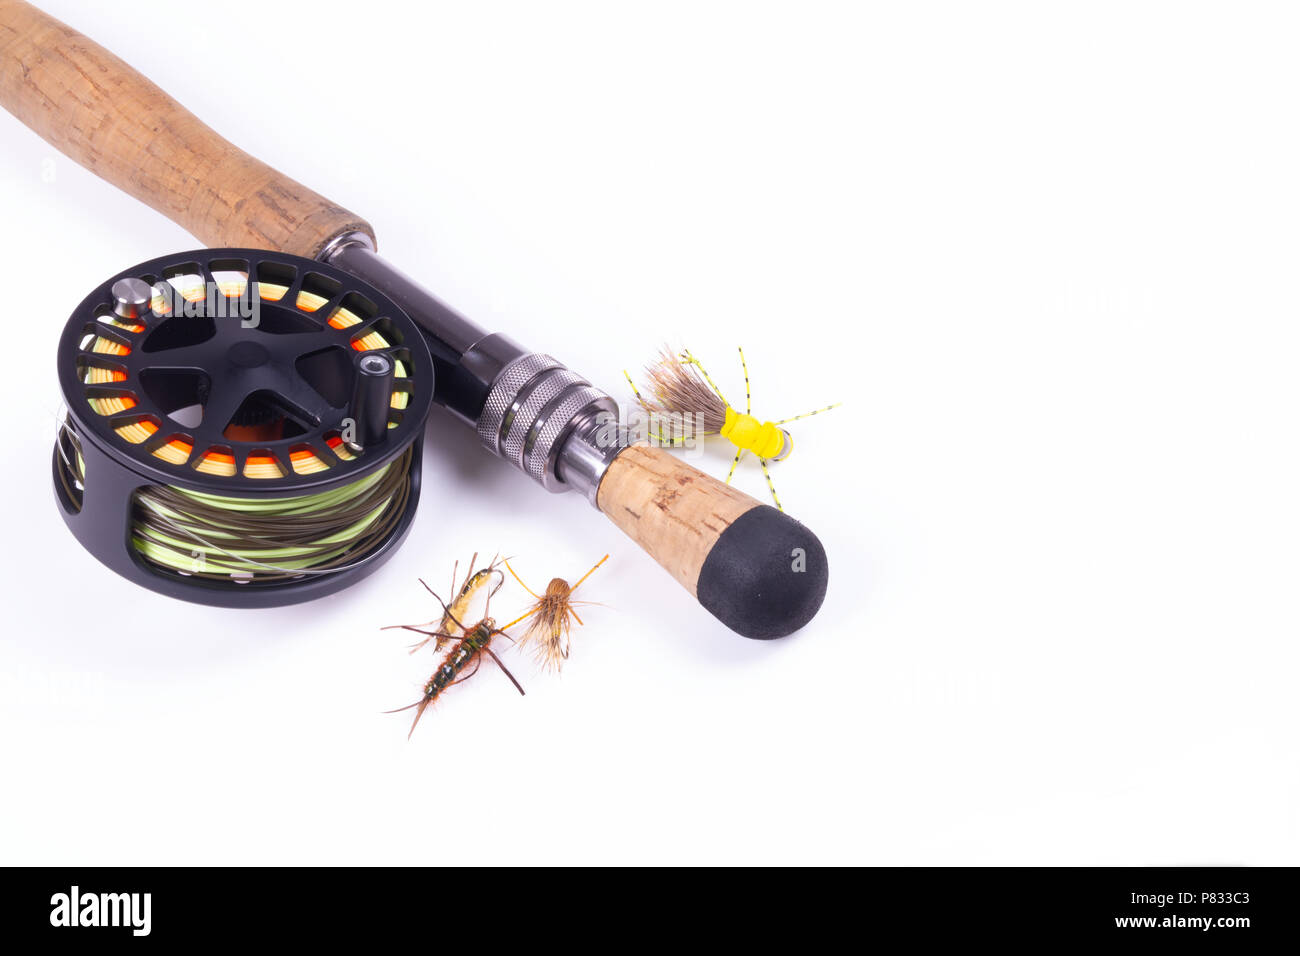 Some basic fly fishing gear on white background. Stock Photo